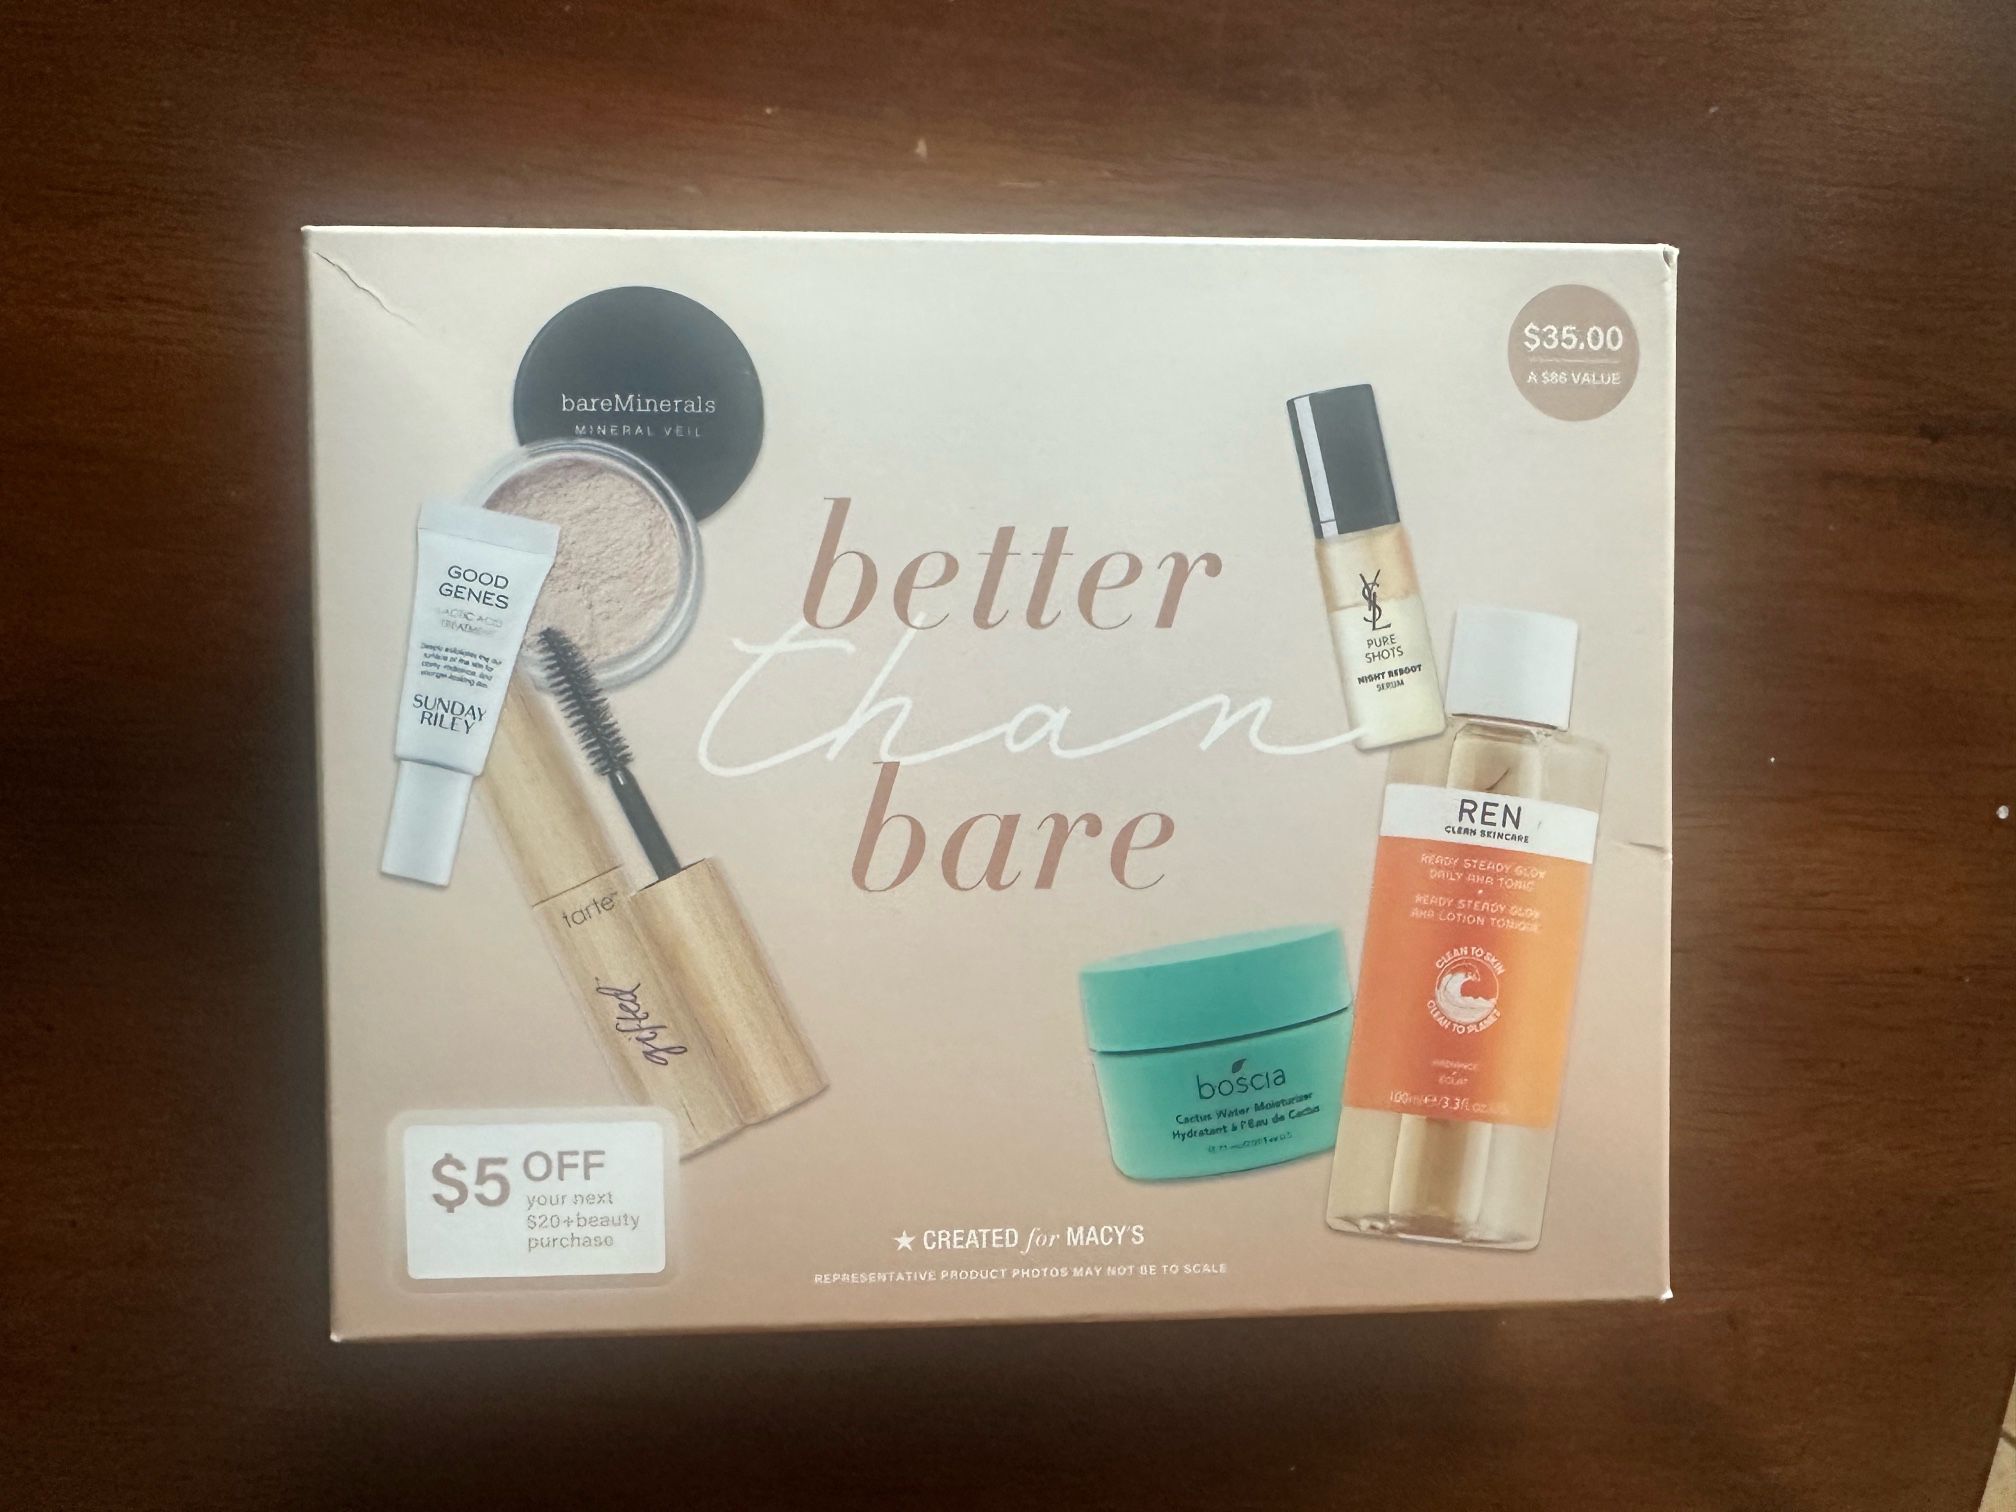 New! 6-piece ‘Better Than Bare’ Clean Beauty Set By Macy's. YSL, Tarte, +